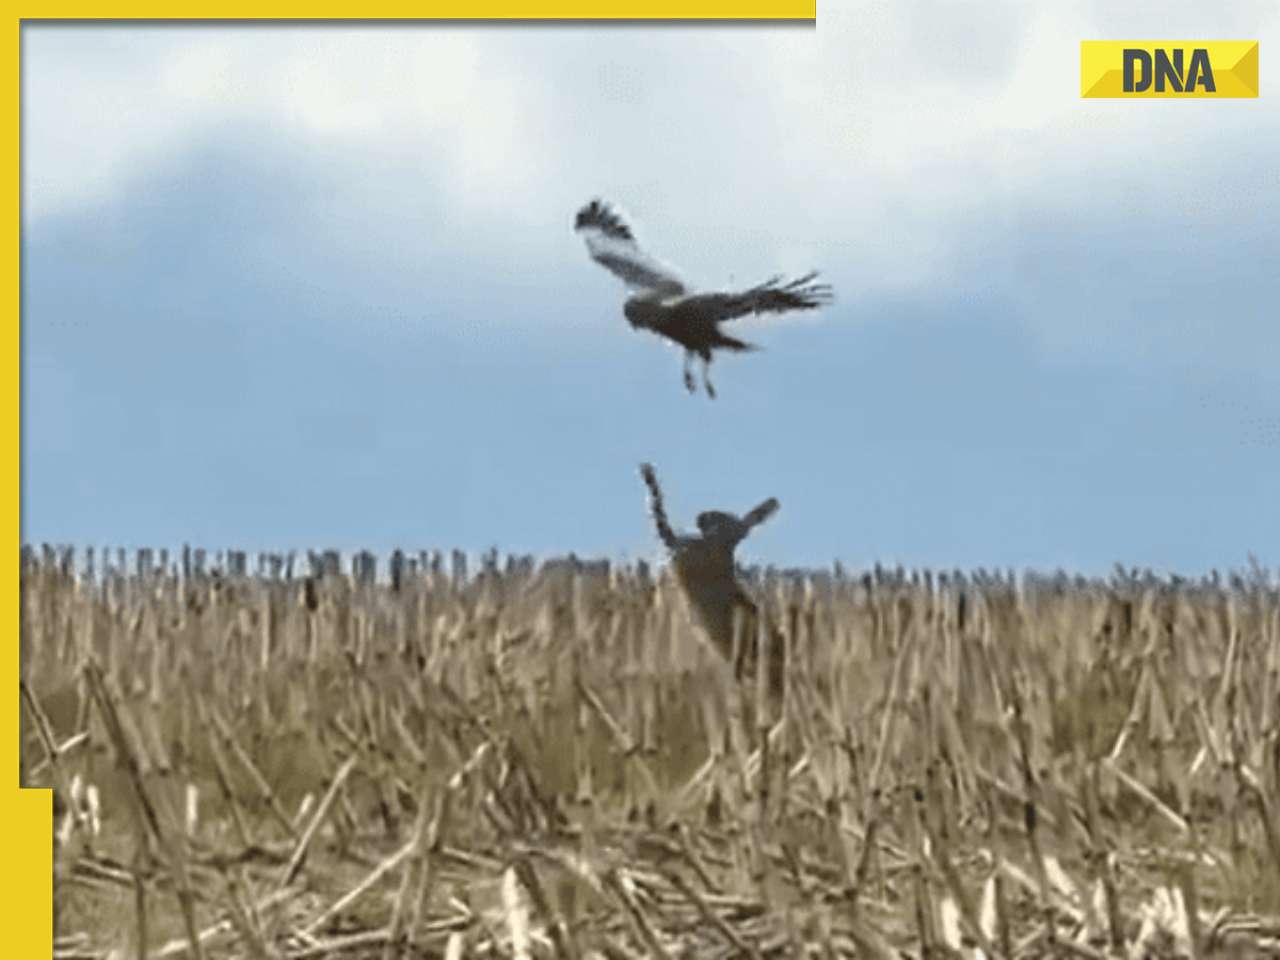 Viral video: Brave mother hare battles hawk to protect her babies, watch